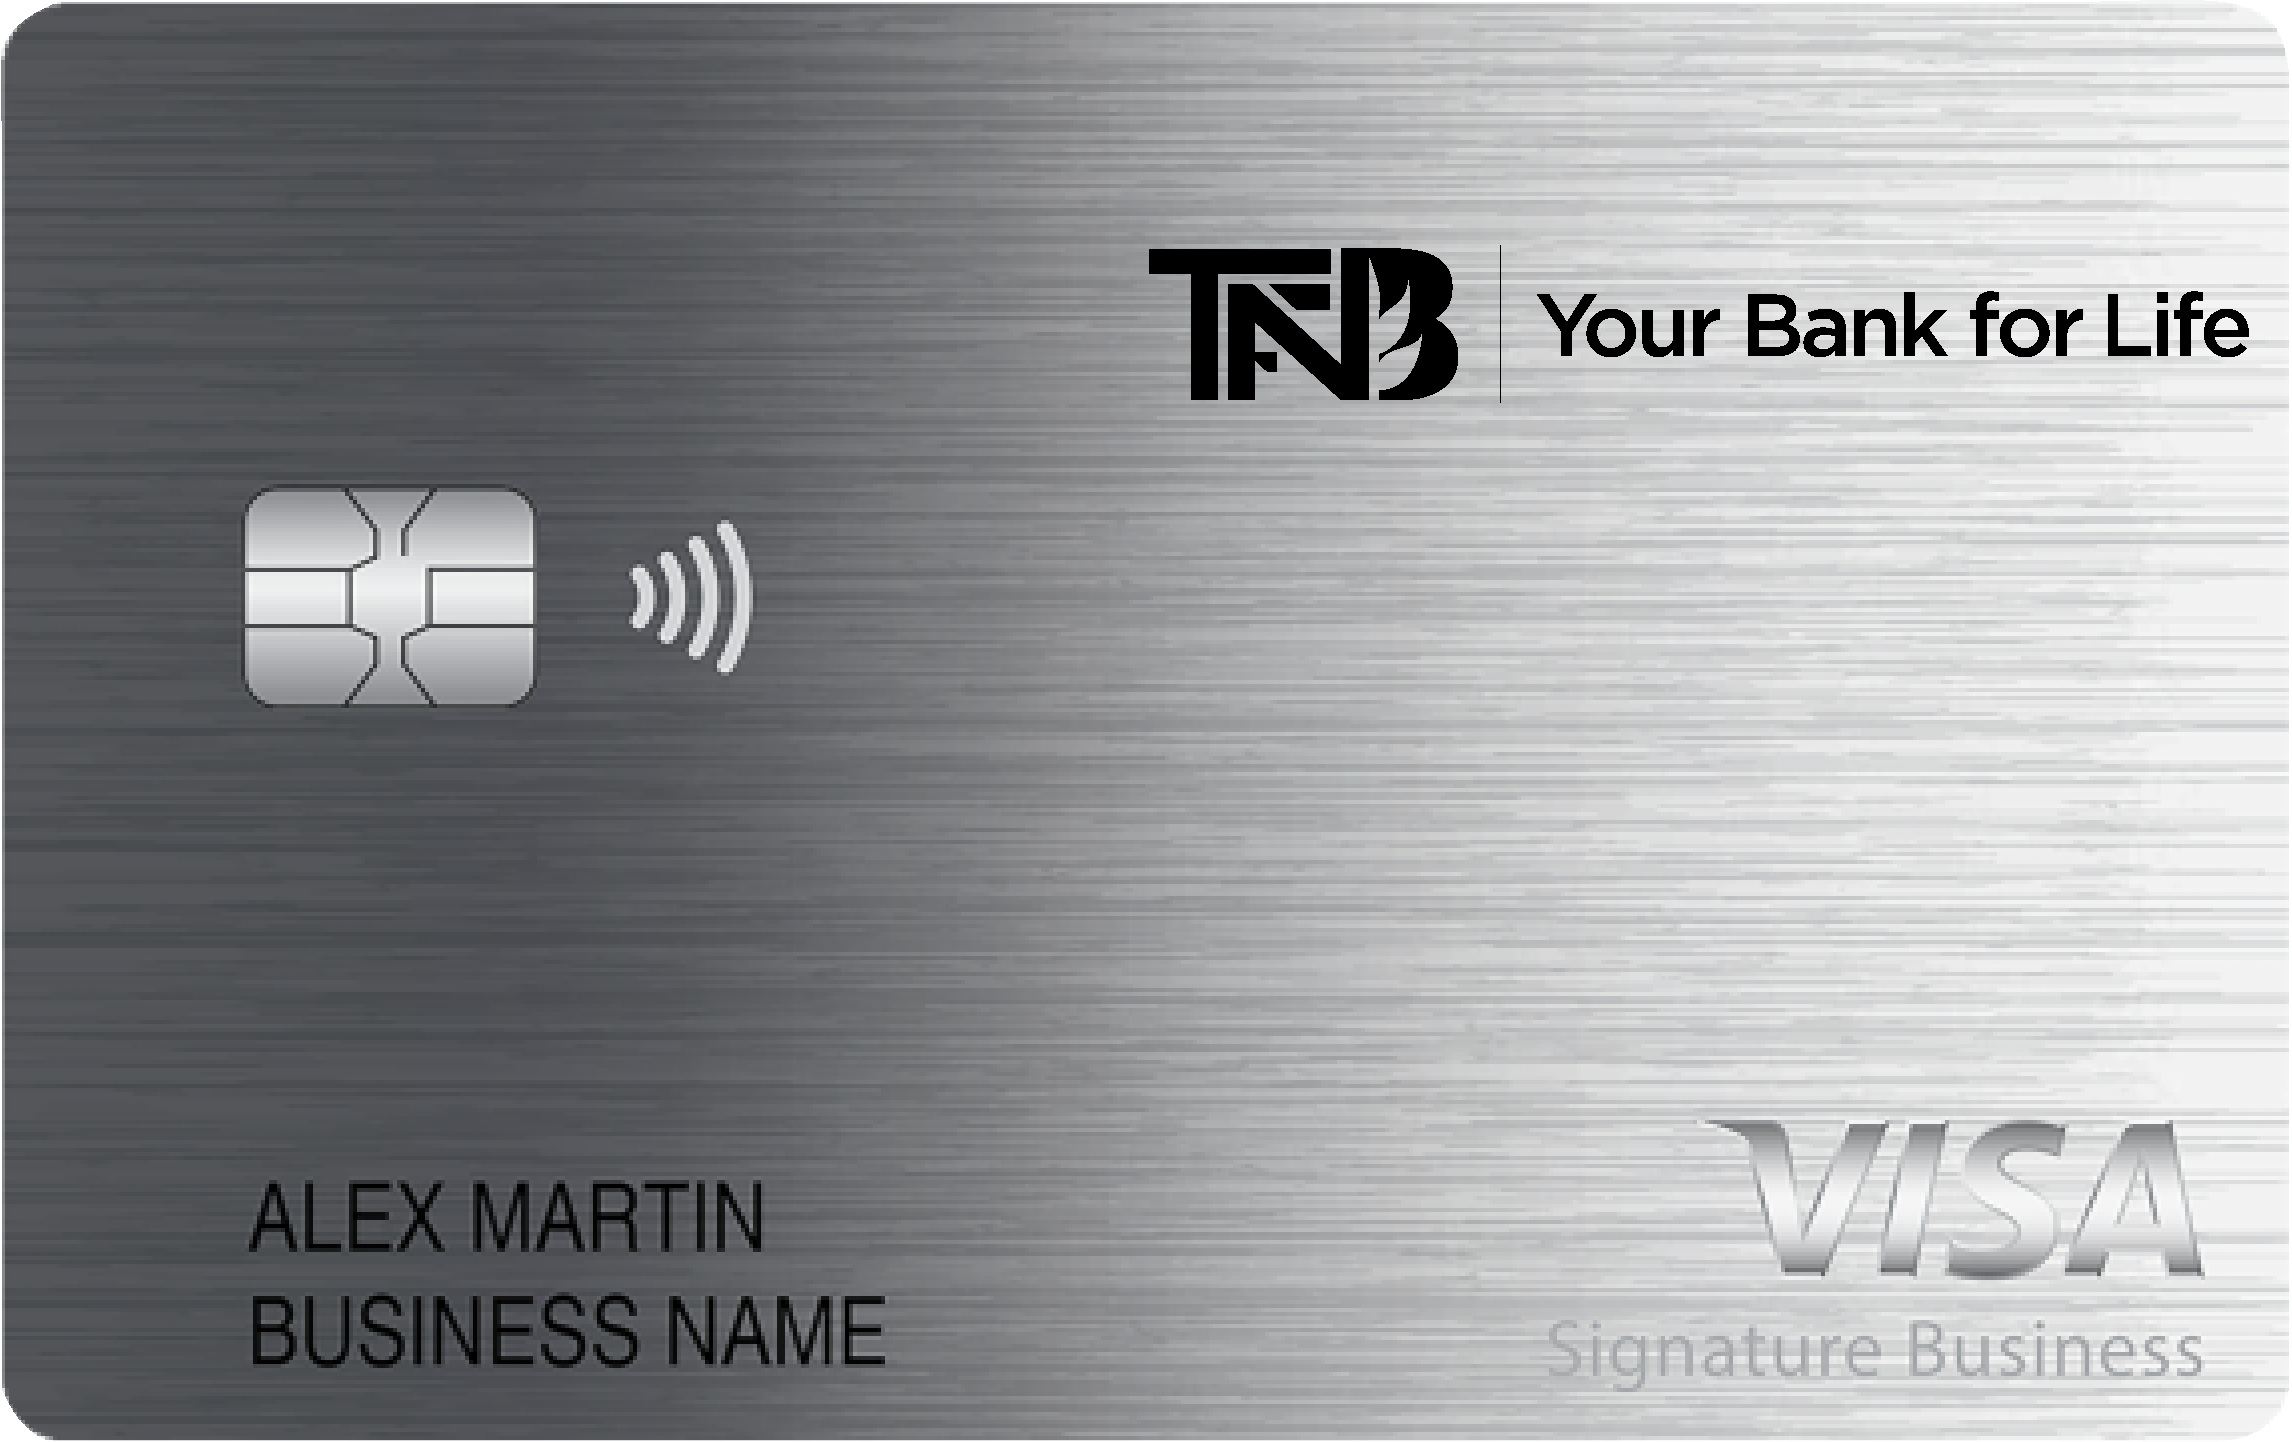 TFNB Your Bank for Life